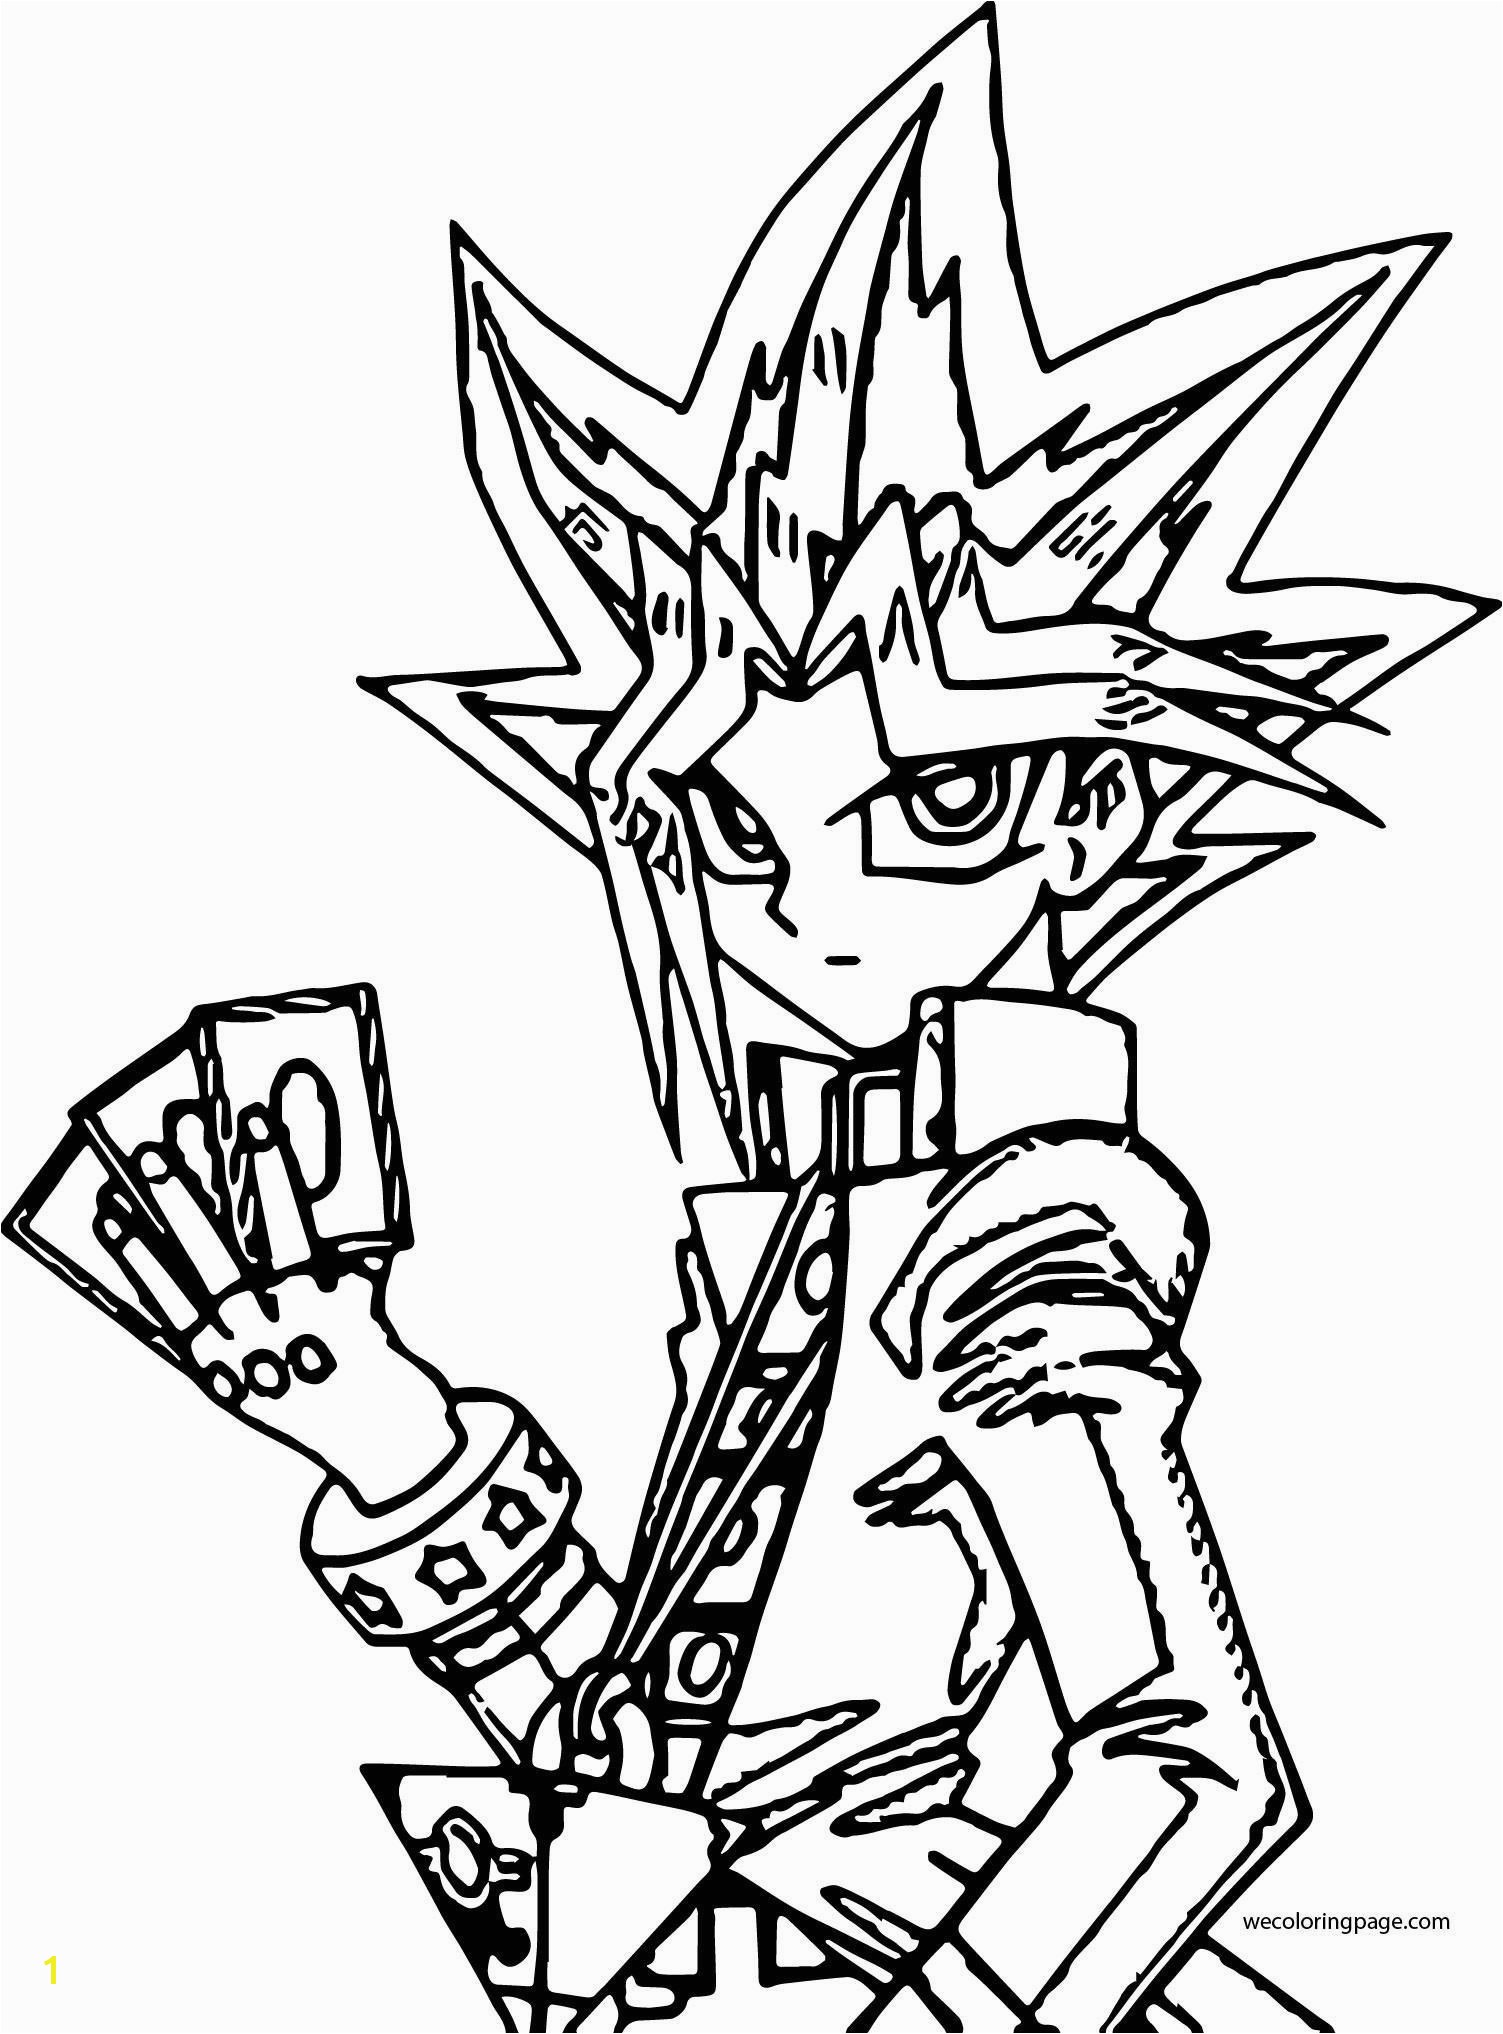 Yu Gi Oh Coloring Pages to Print Mangle Coloring Pages Mangle Coloring Pages Awesome 19 Elegant